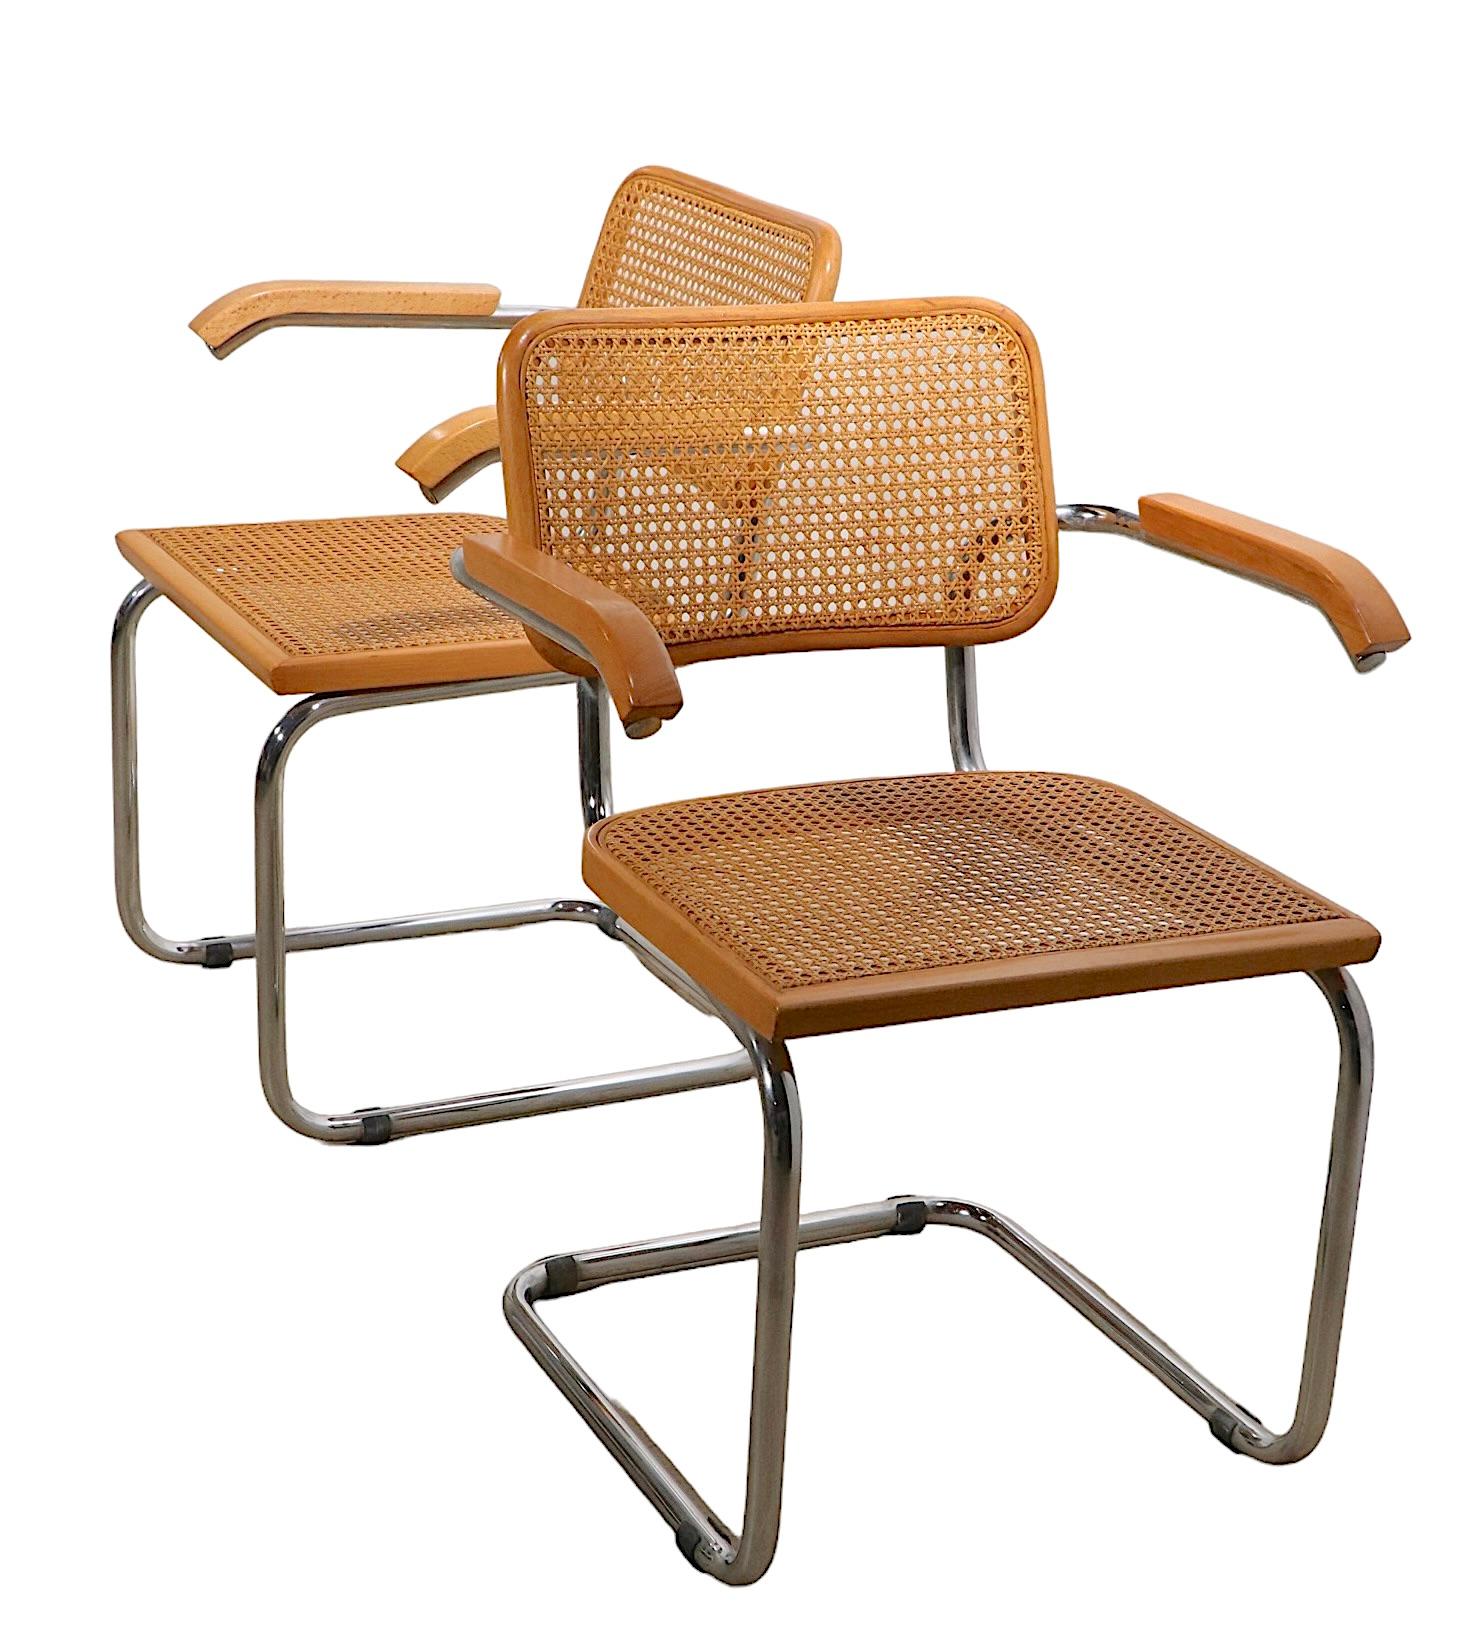 Cane Pr. Breuer Cesca Chairs Made in Italy, C 1970's